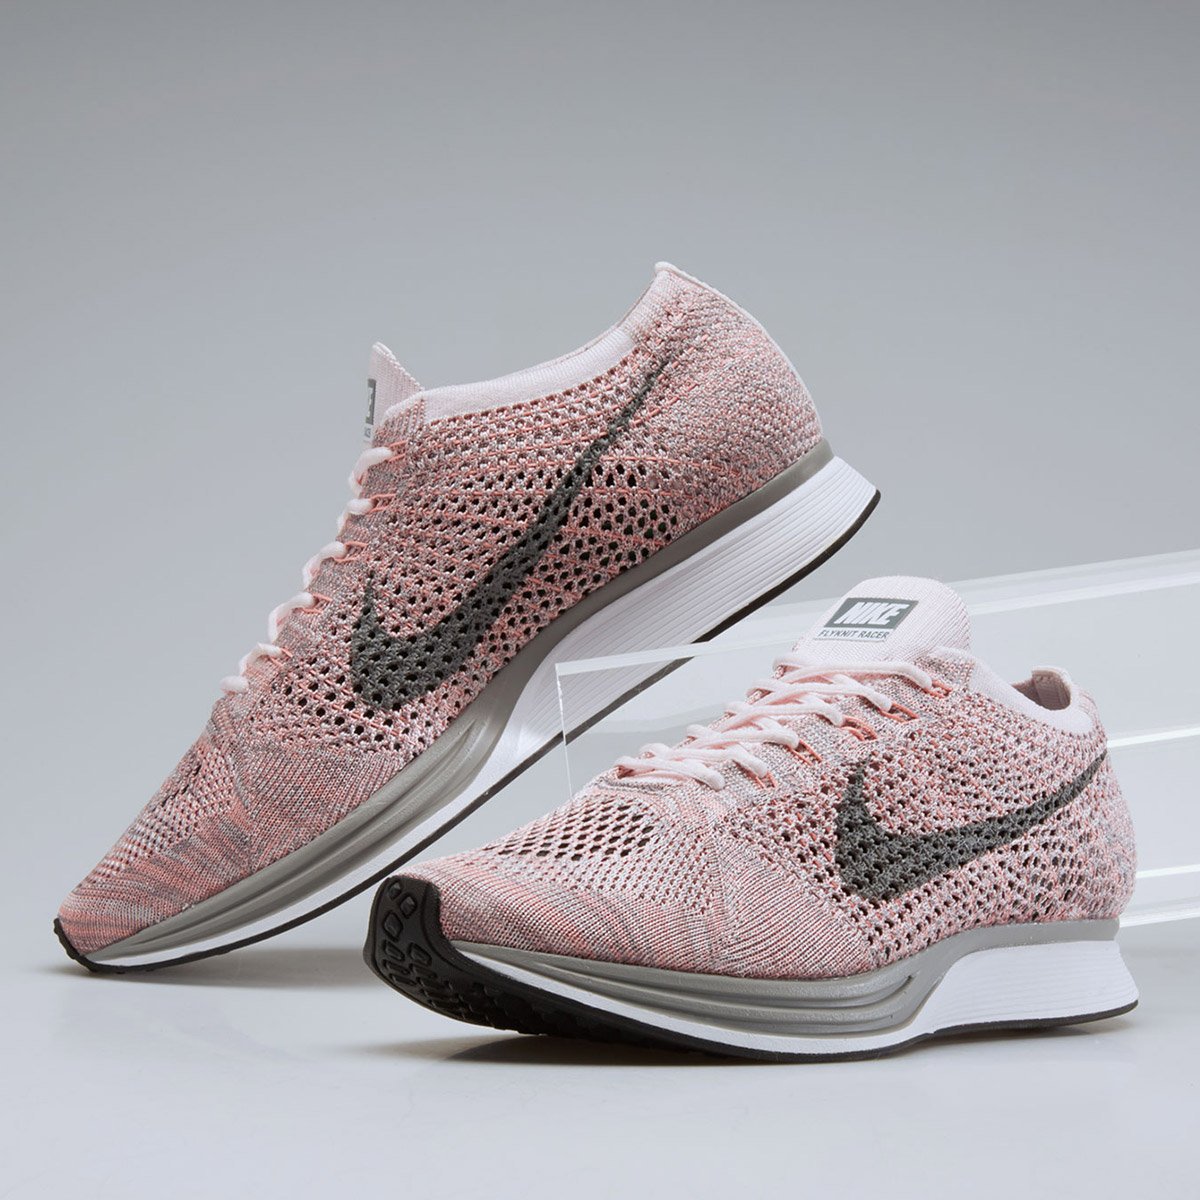 on Twitter: "Register now for @Nike #Flyknit Racer #Macaron pack at https://t.co/9dHFDH7h6l. Draw closes 8am BST 19th (£129) / Twitter